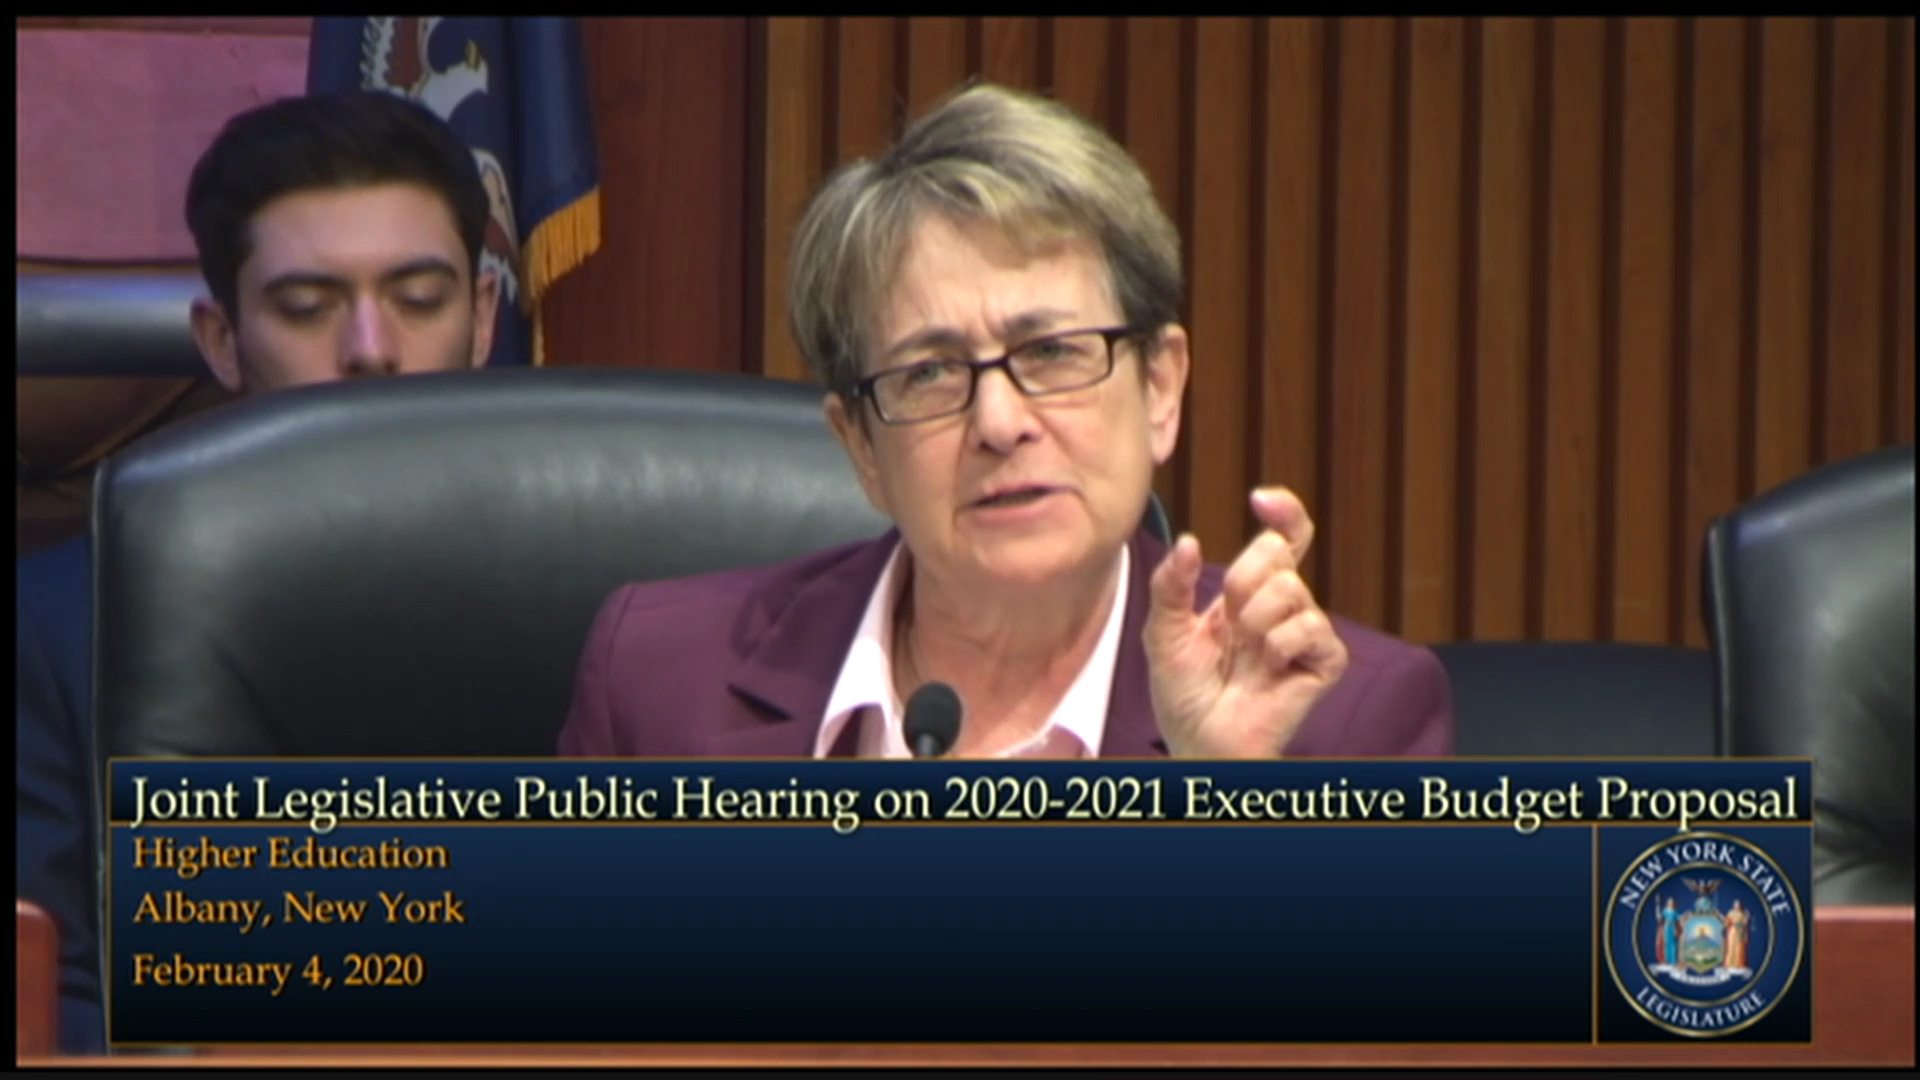 CUNY Chancellor Testifies at Higher Education Budget Hearing